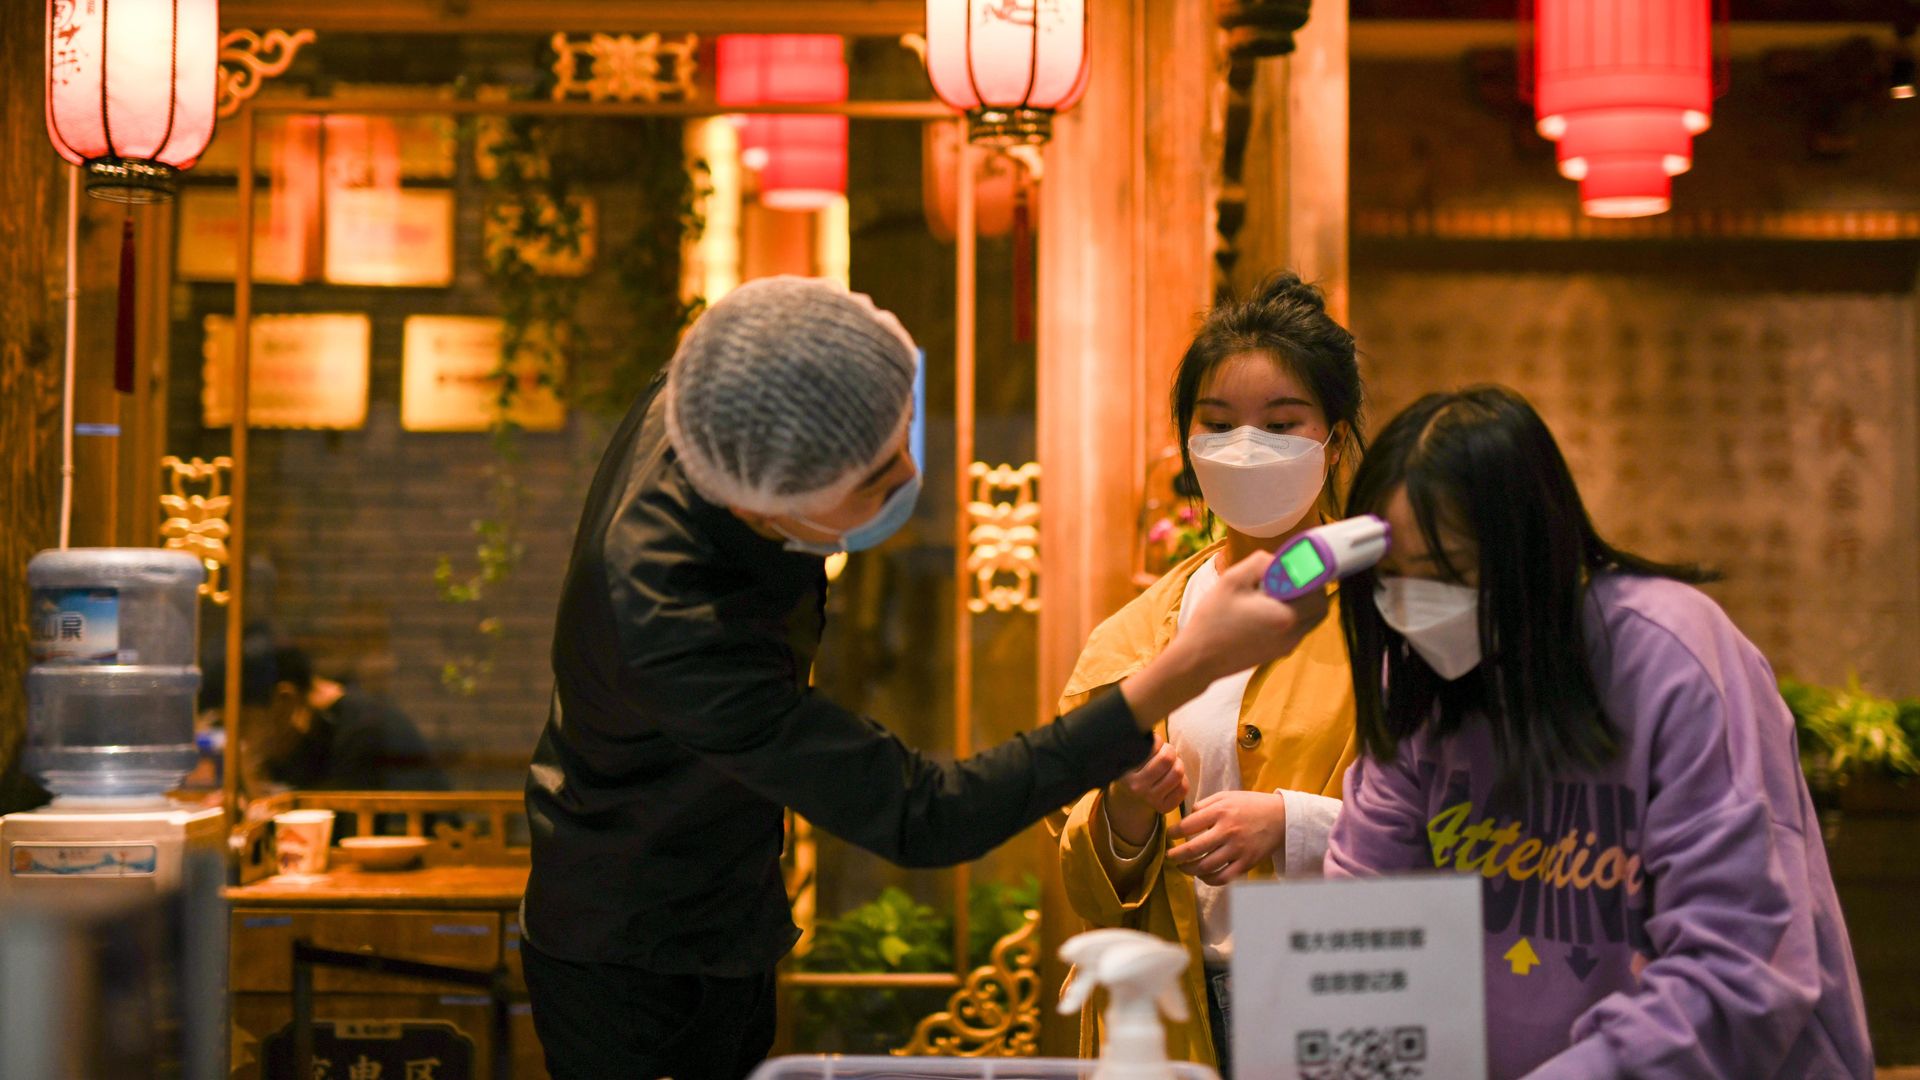 A restaurant employee checks the temperature of two customers wearing face masks.